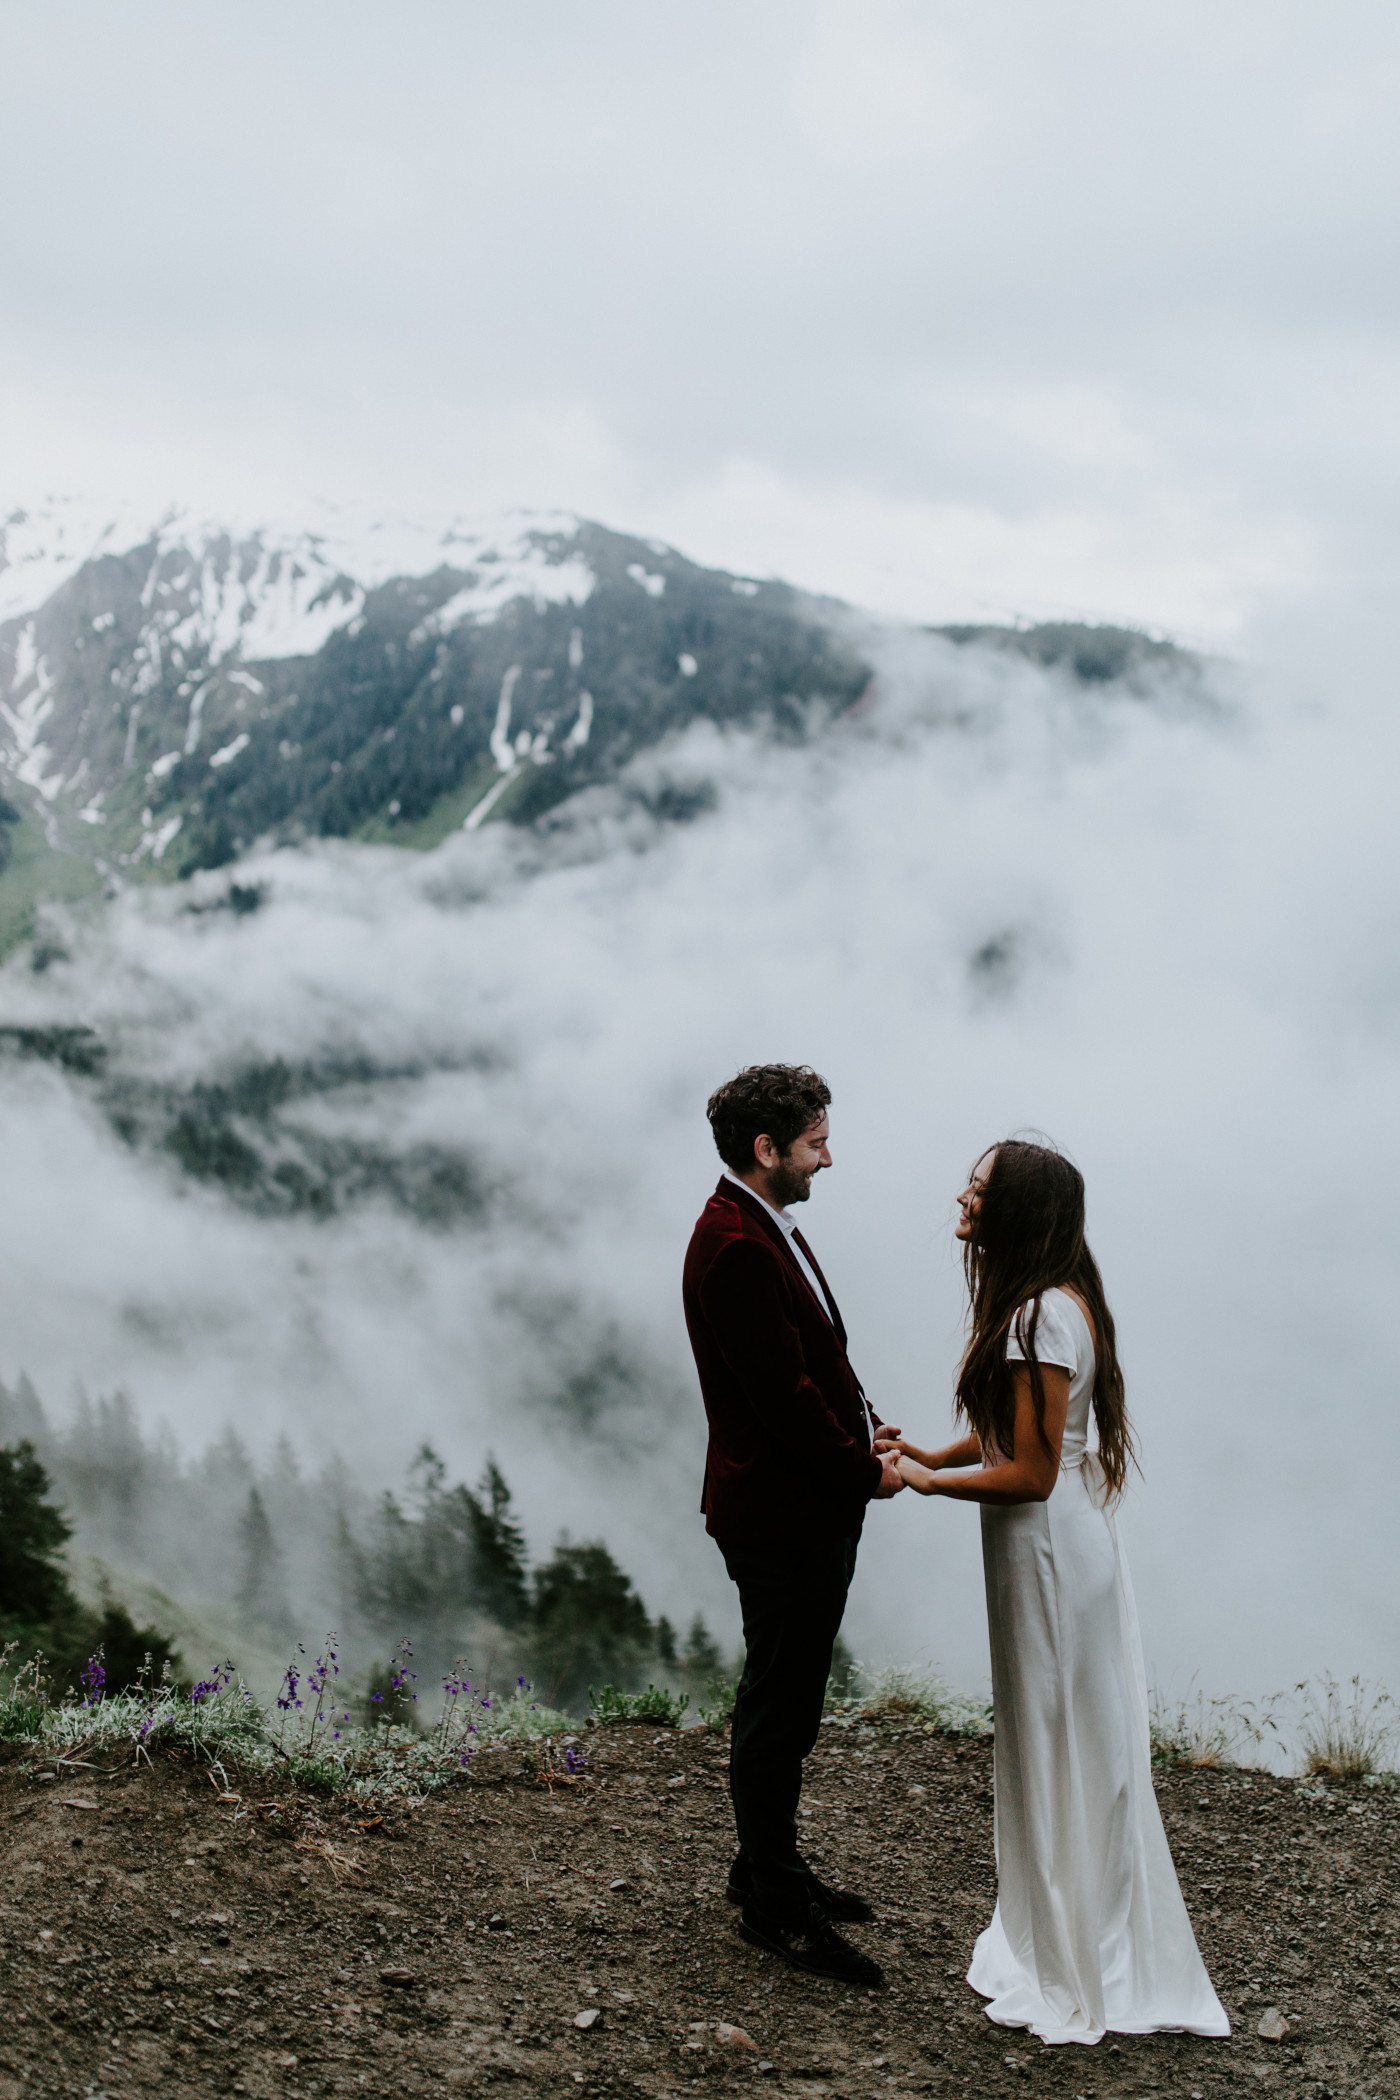 Murray and Katelyn stand near a cliff with the clouds and Mount Hood in the background. Elopement wedding photography at Mount Hood by Sienna Plus Josh.